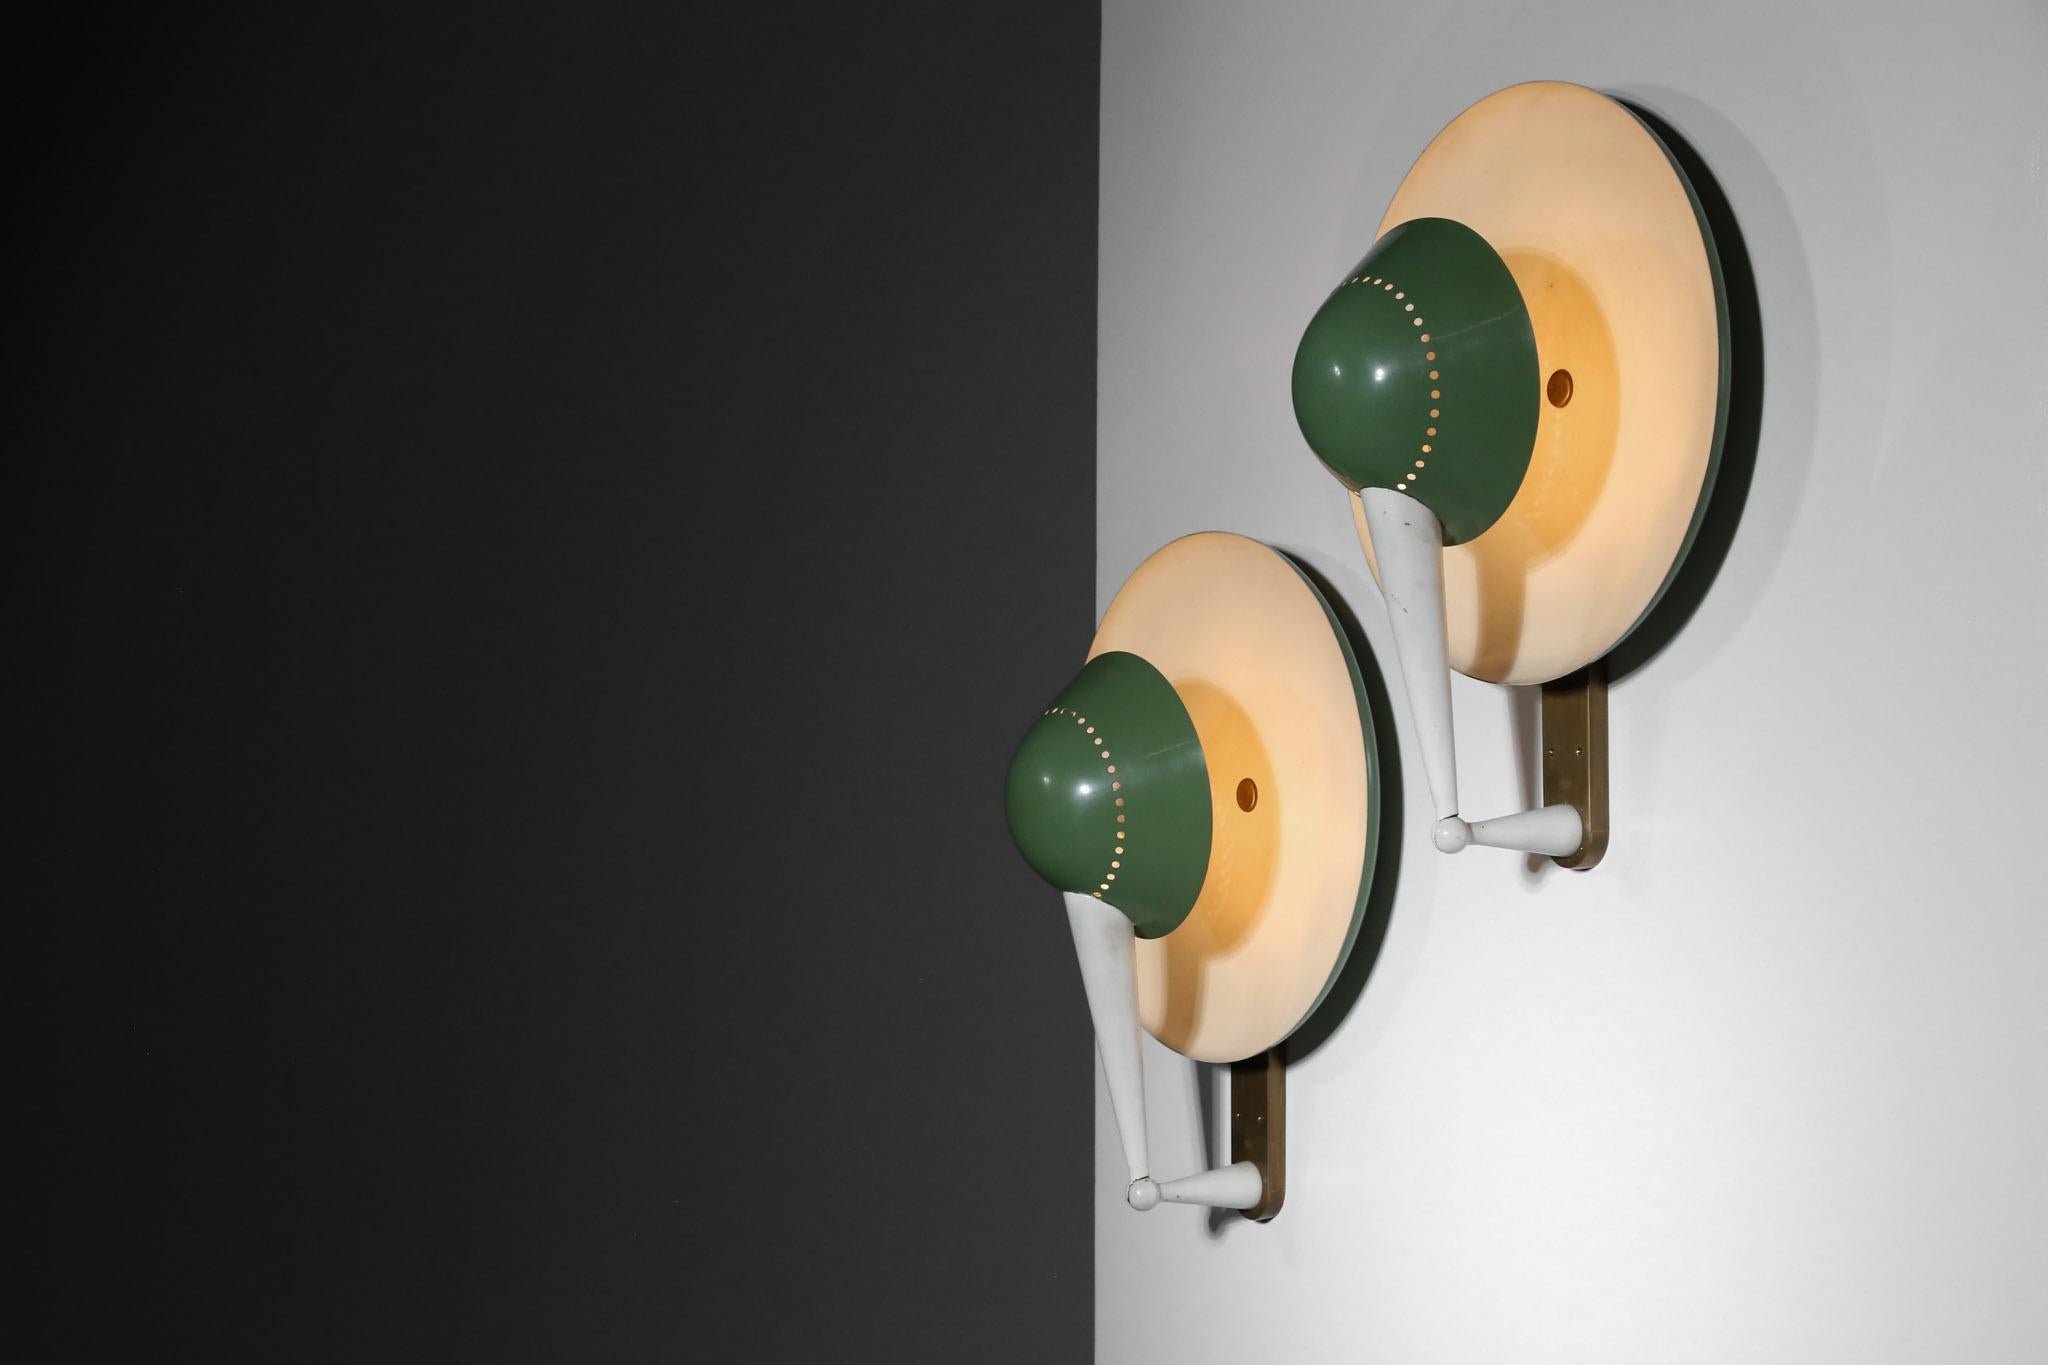 Rare wall lights model B4917 by Stilnovo.
Structure made of metal and brass.
Really nice design.
Light are adjustable, creating an amazing atmosphere.
Both with signature.